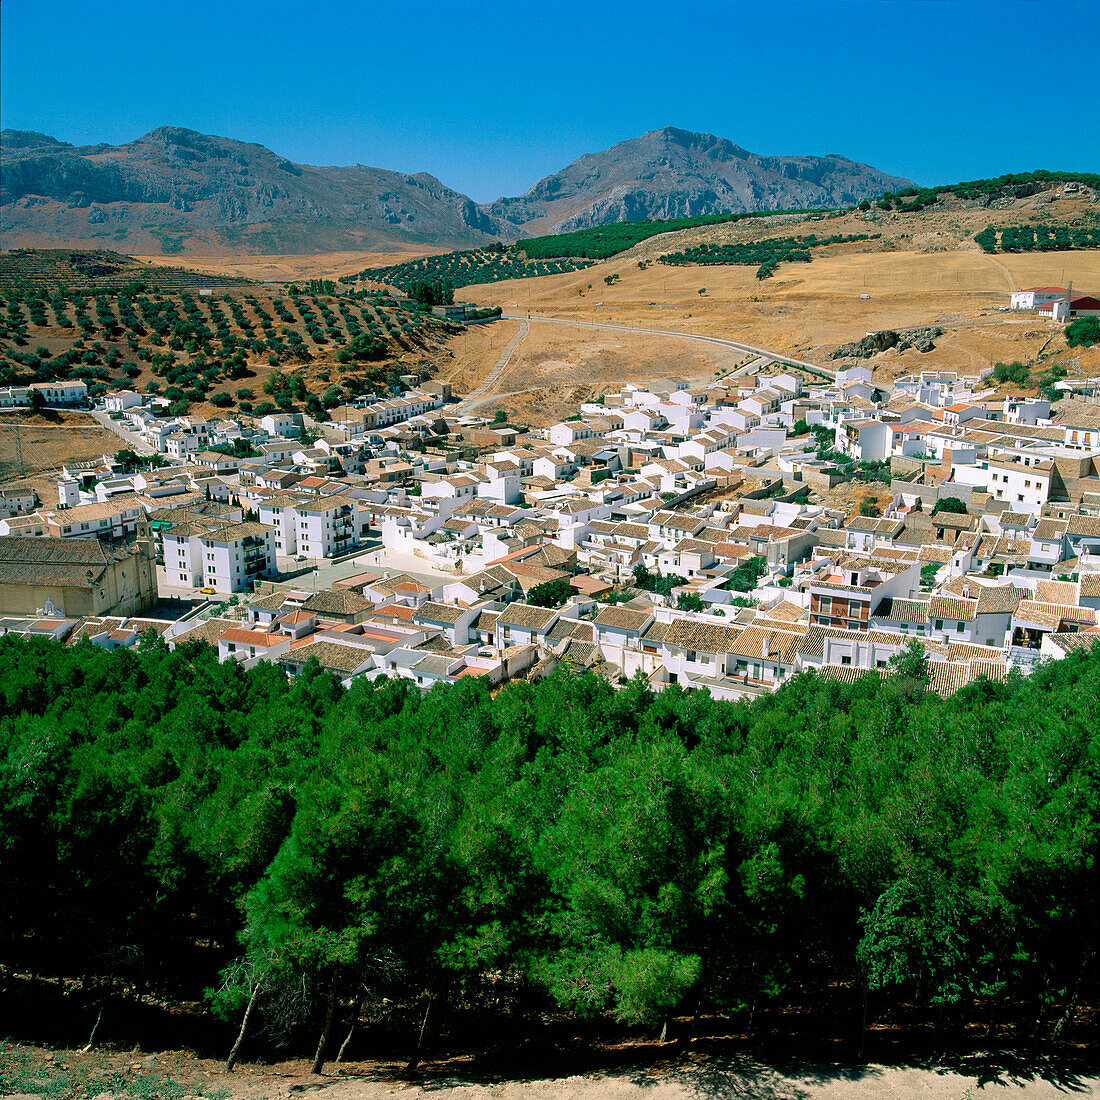 Town of Antequera, view from the castle. Malaga province. Andalusia. Spain